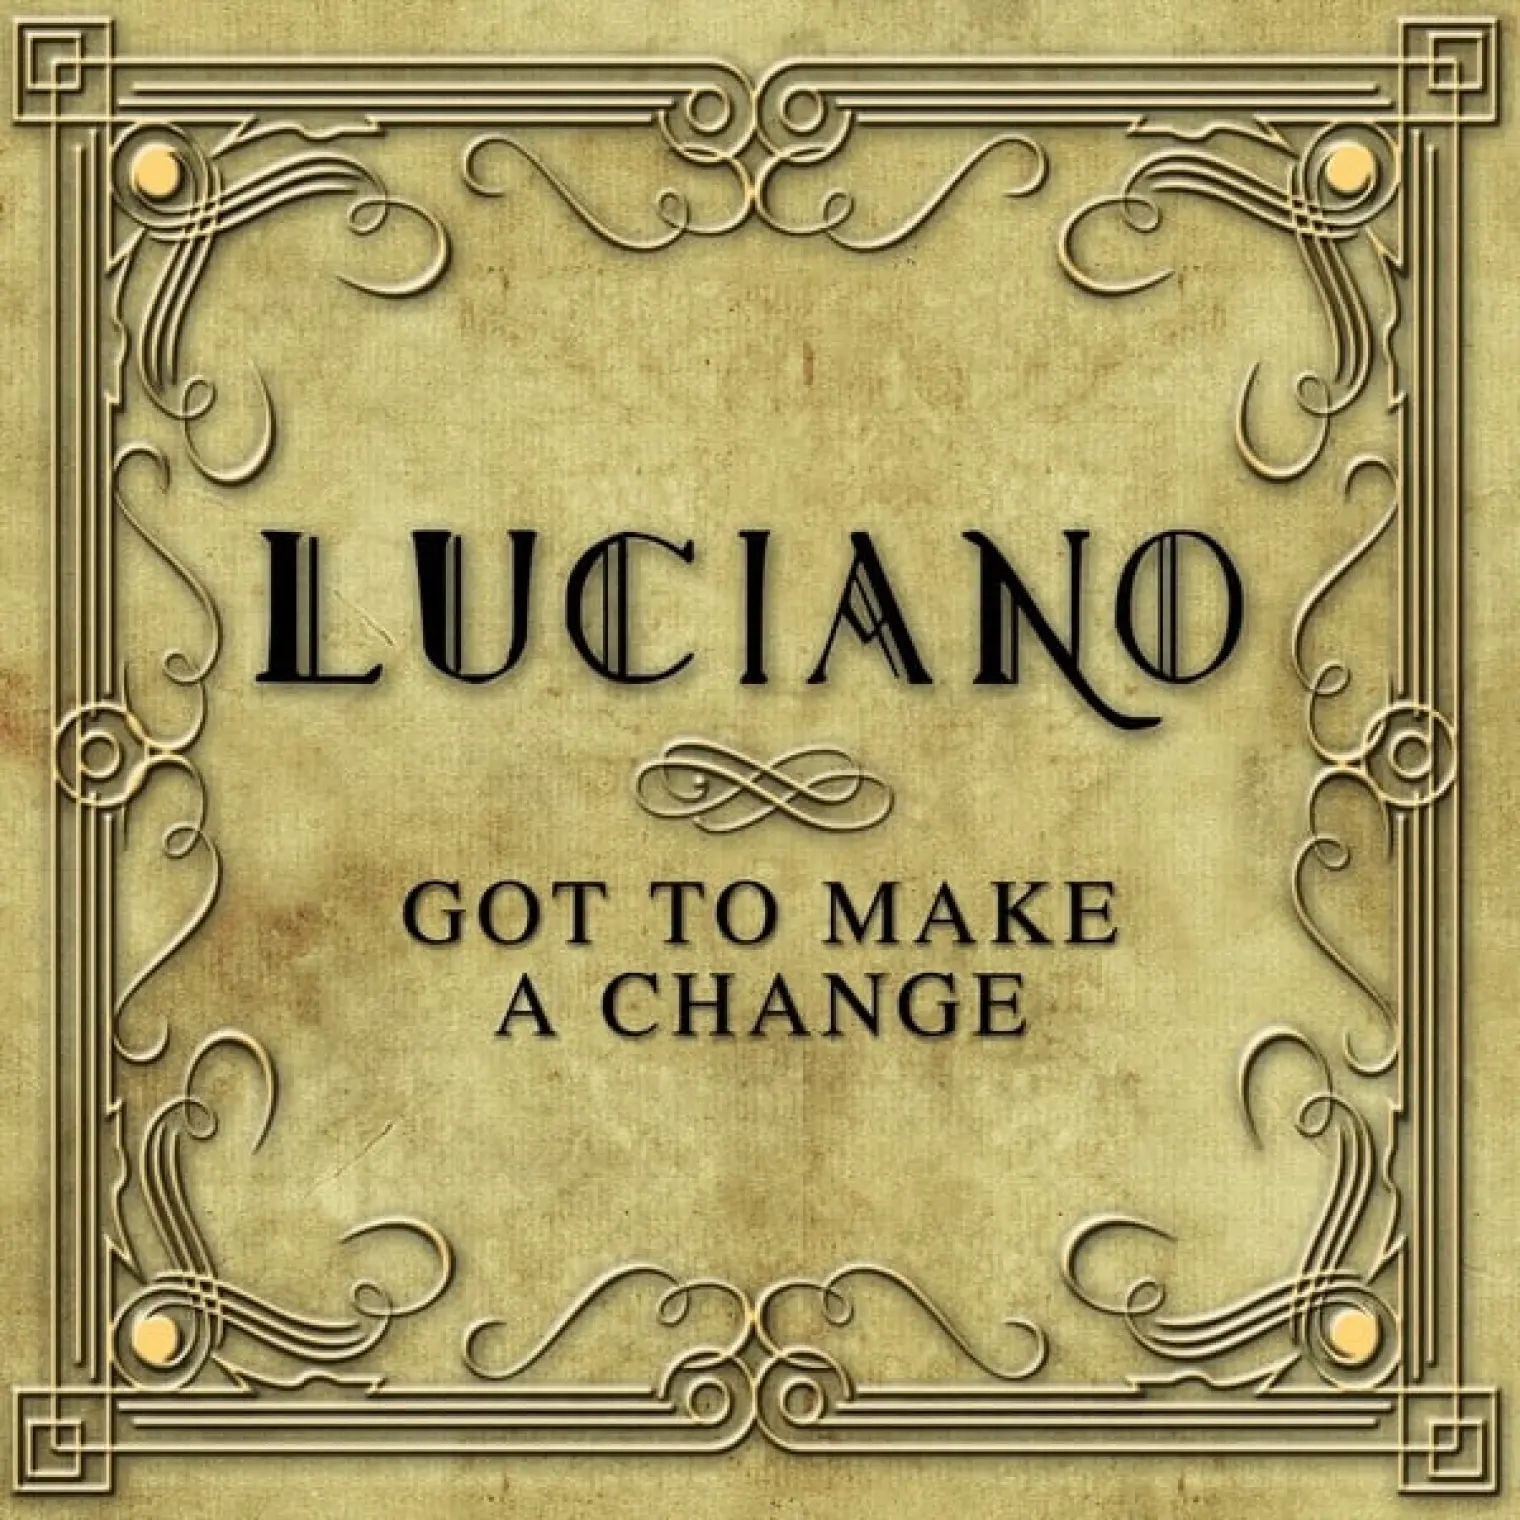 Got to Make a Change -  Luciano 